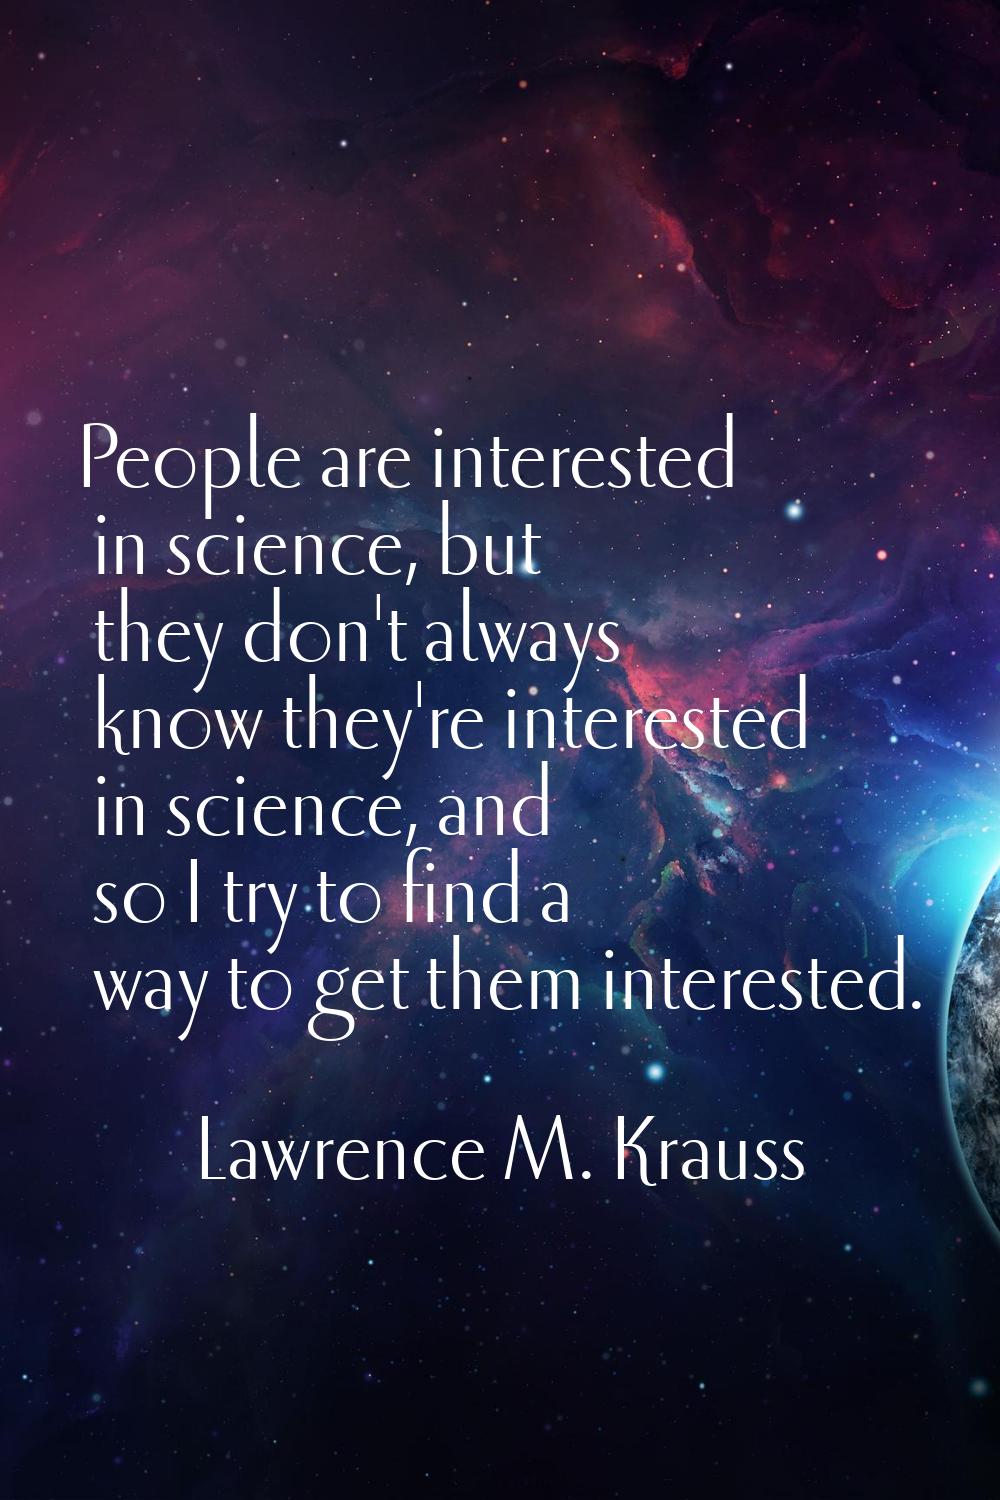 People are interested in science, but they don't always know they're interested in science, and so 